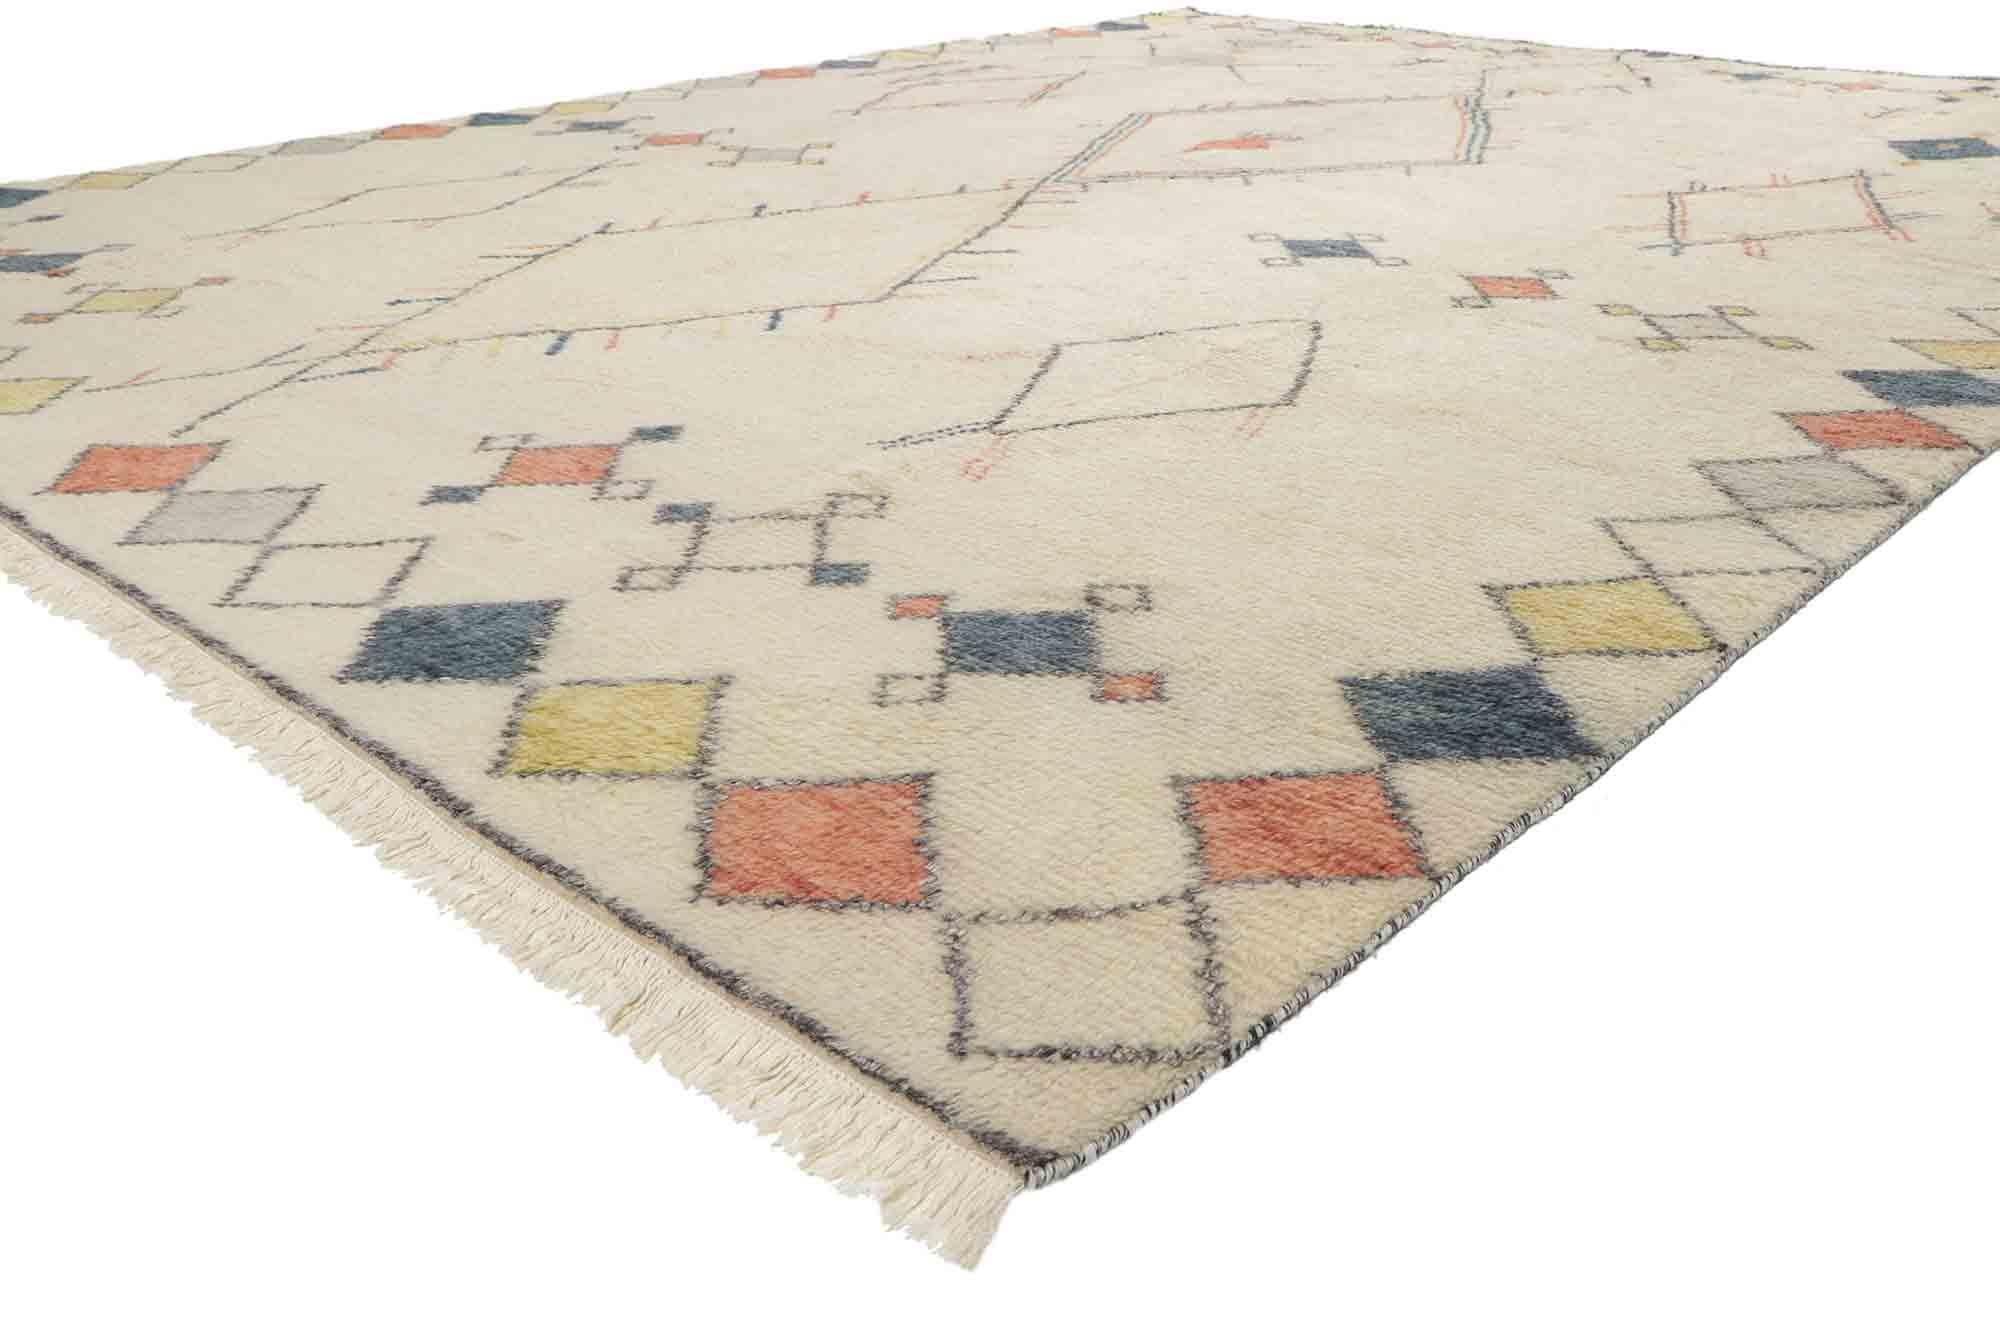 30346 New Contemporary Moroccan Style Area rug with Modern Northwestern Lodge Style. This contemporary Moroccan style area rug with modern tribal design evokes an exotic escape while adding texture and depth. This is a fantastic example of a